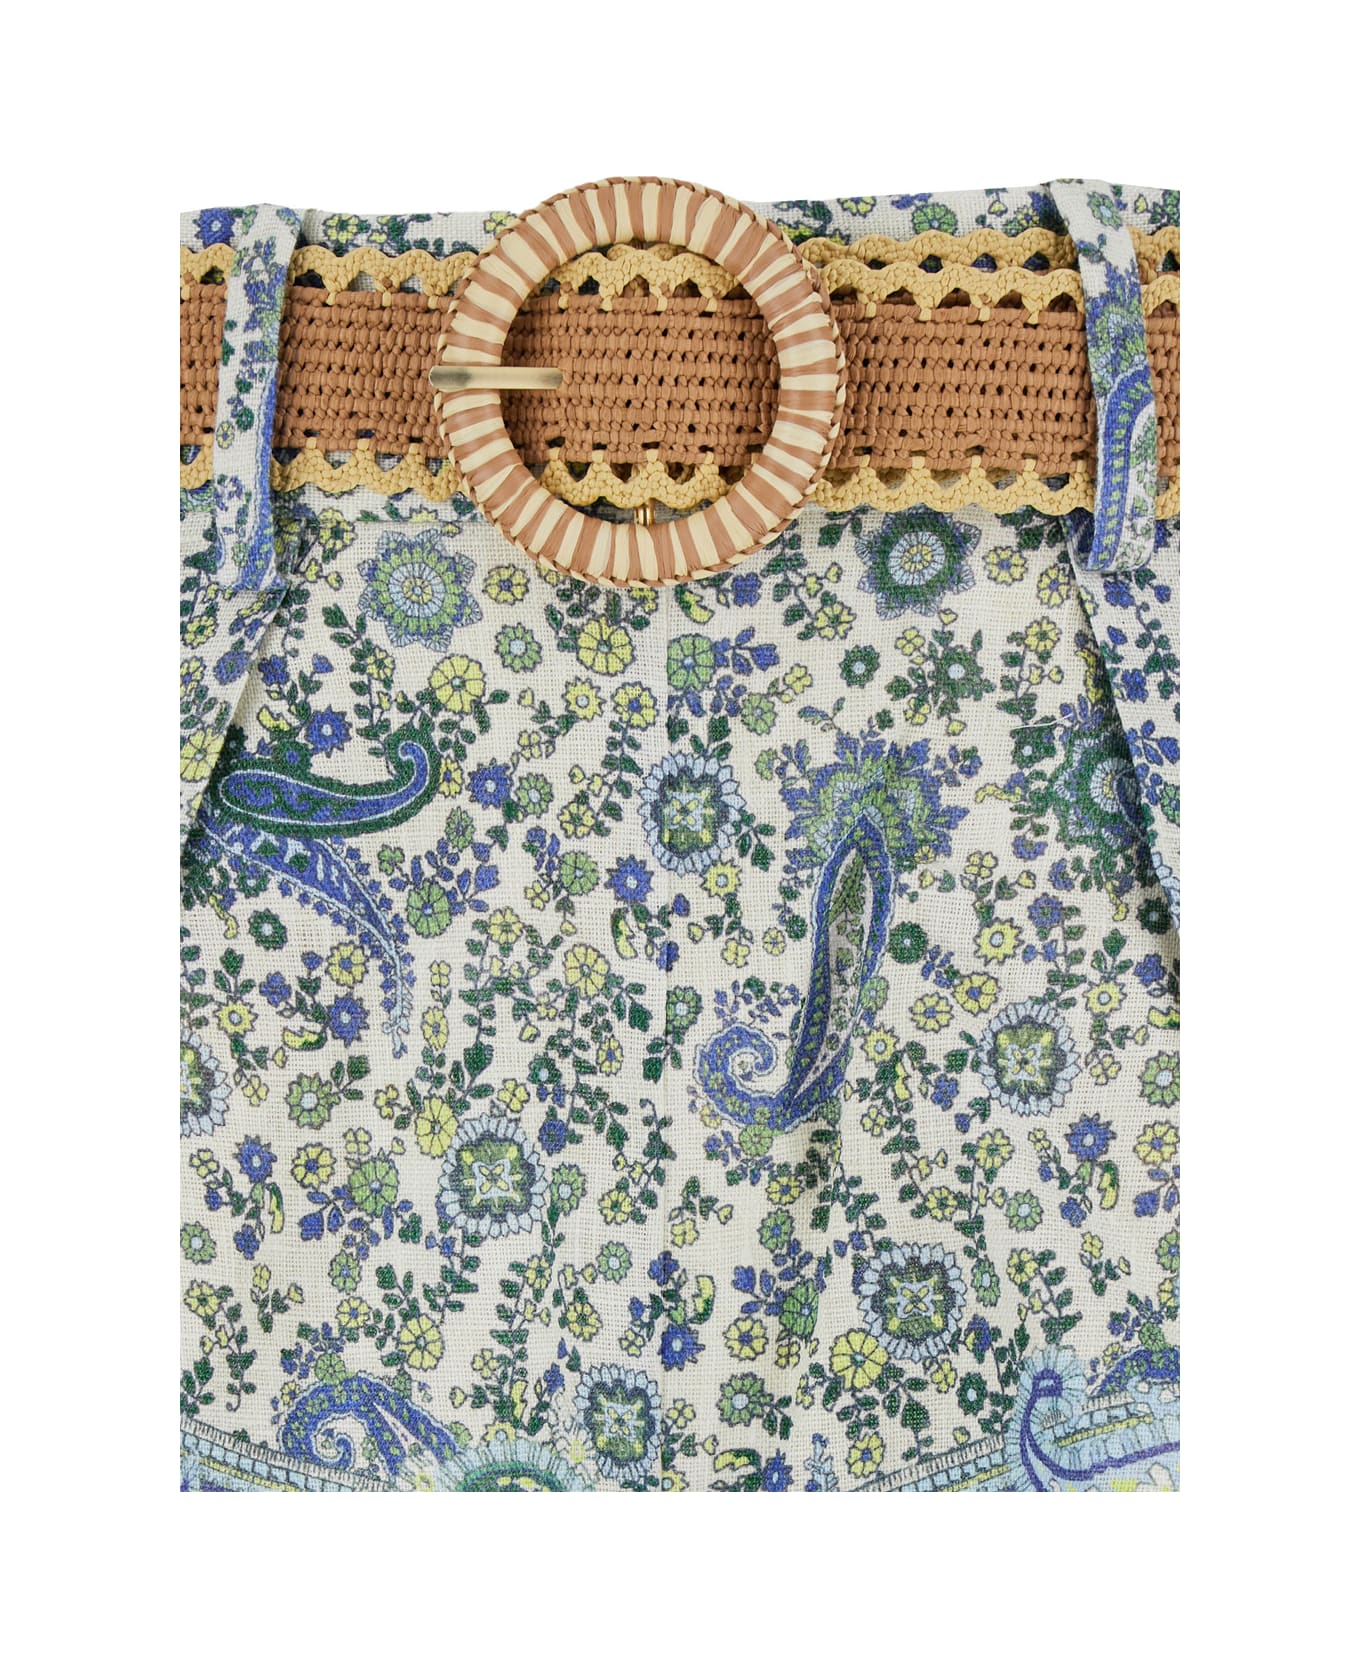 Zimmermann Multicolor Shorts With Floral Print In Linen Woman - Multicolor